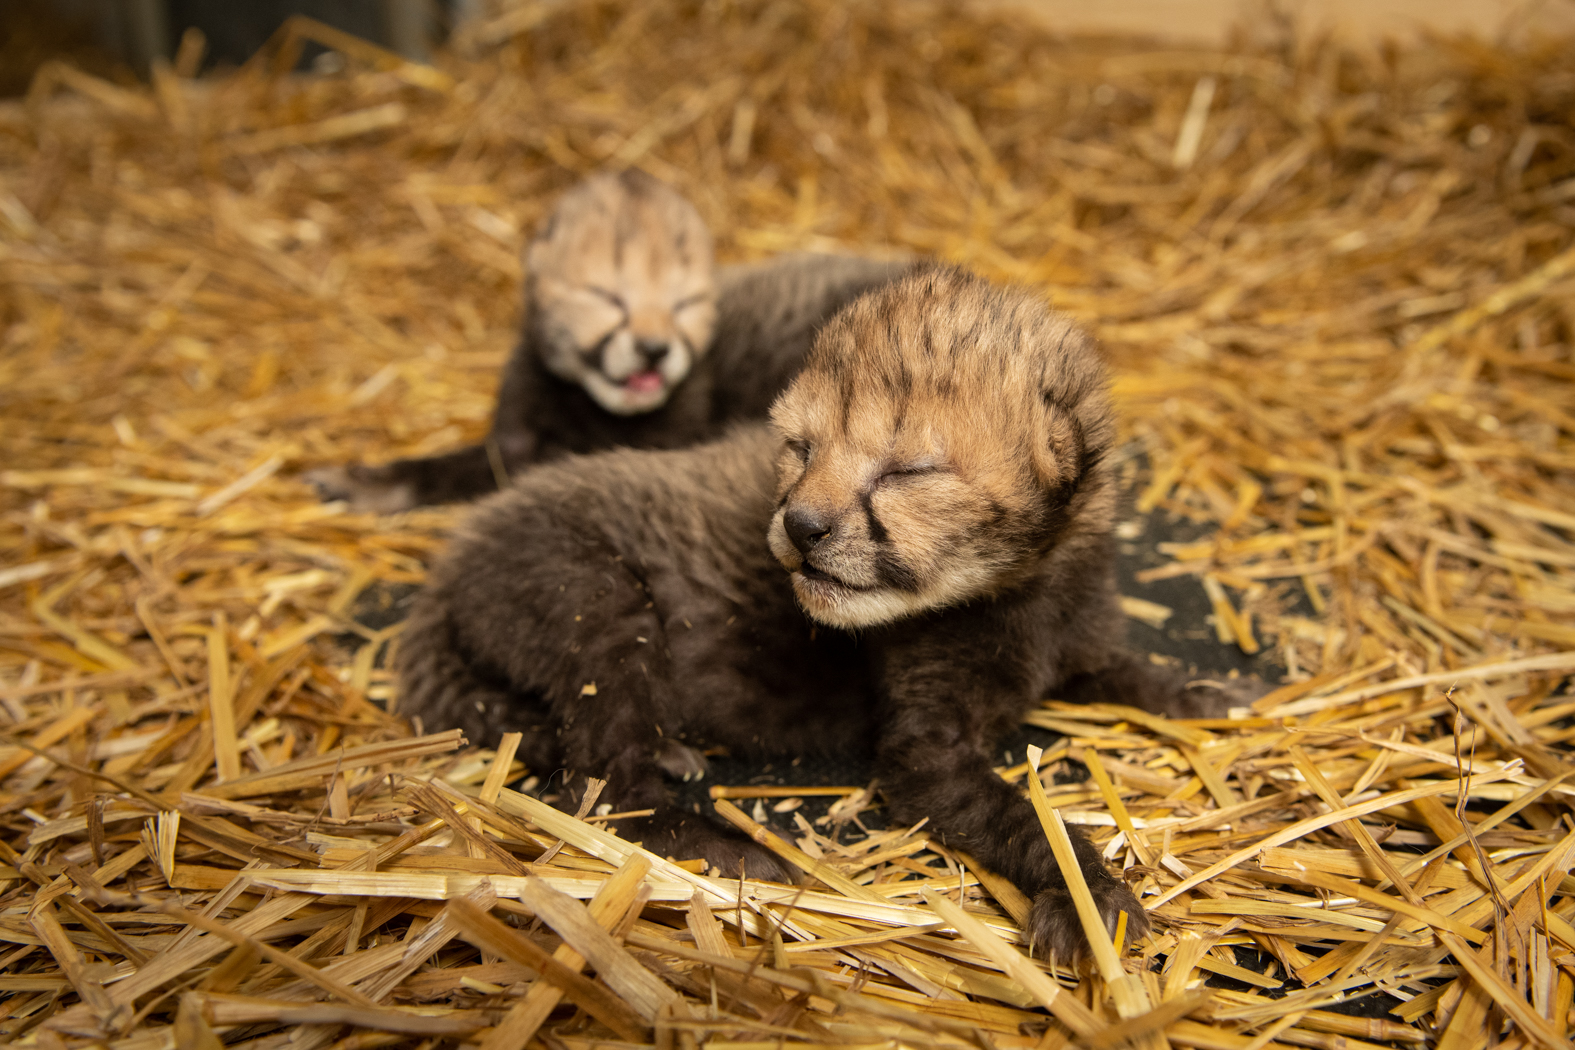 PHOTO: Two cheetah cubs, one male and one female, were born via in vitro fertilization for the first time at the Columbus Zoo, in Powell, Ohio, Feb. 19, 2020.